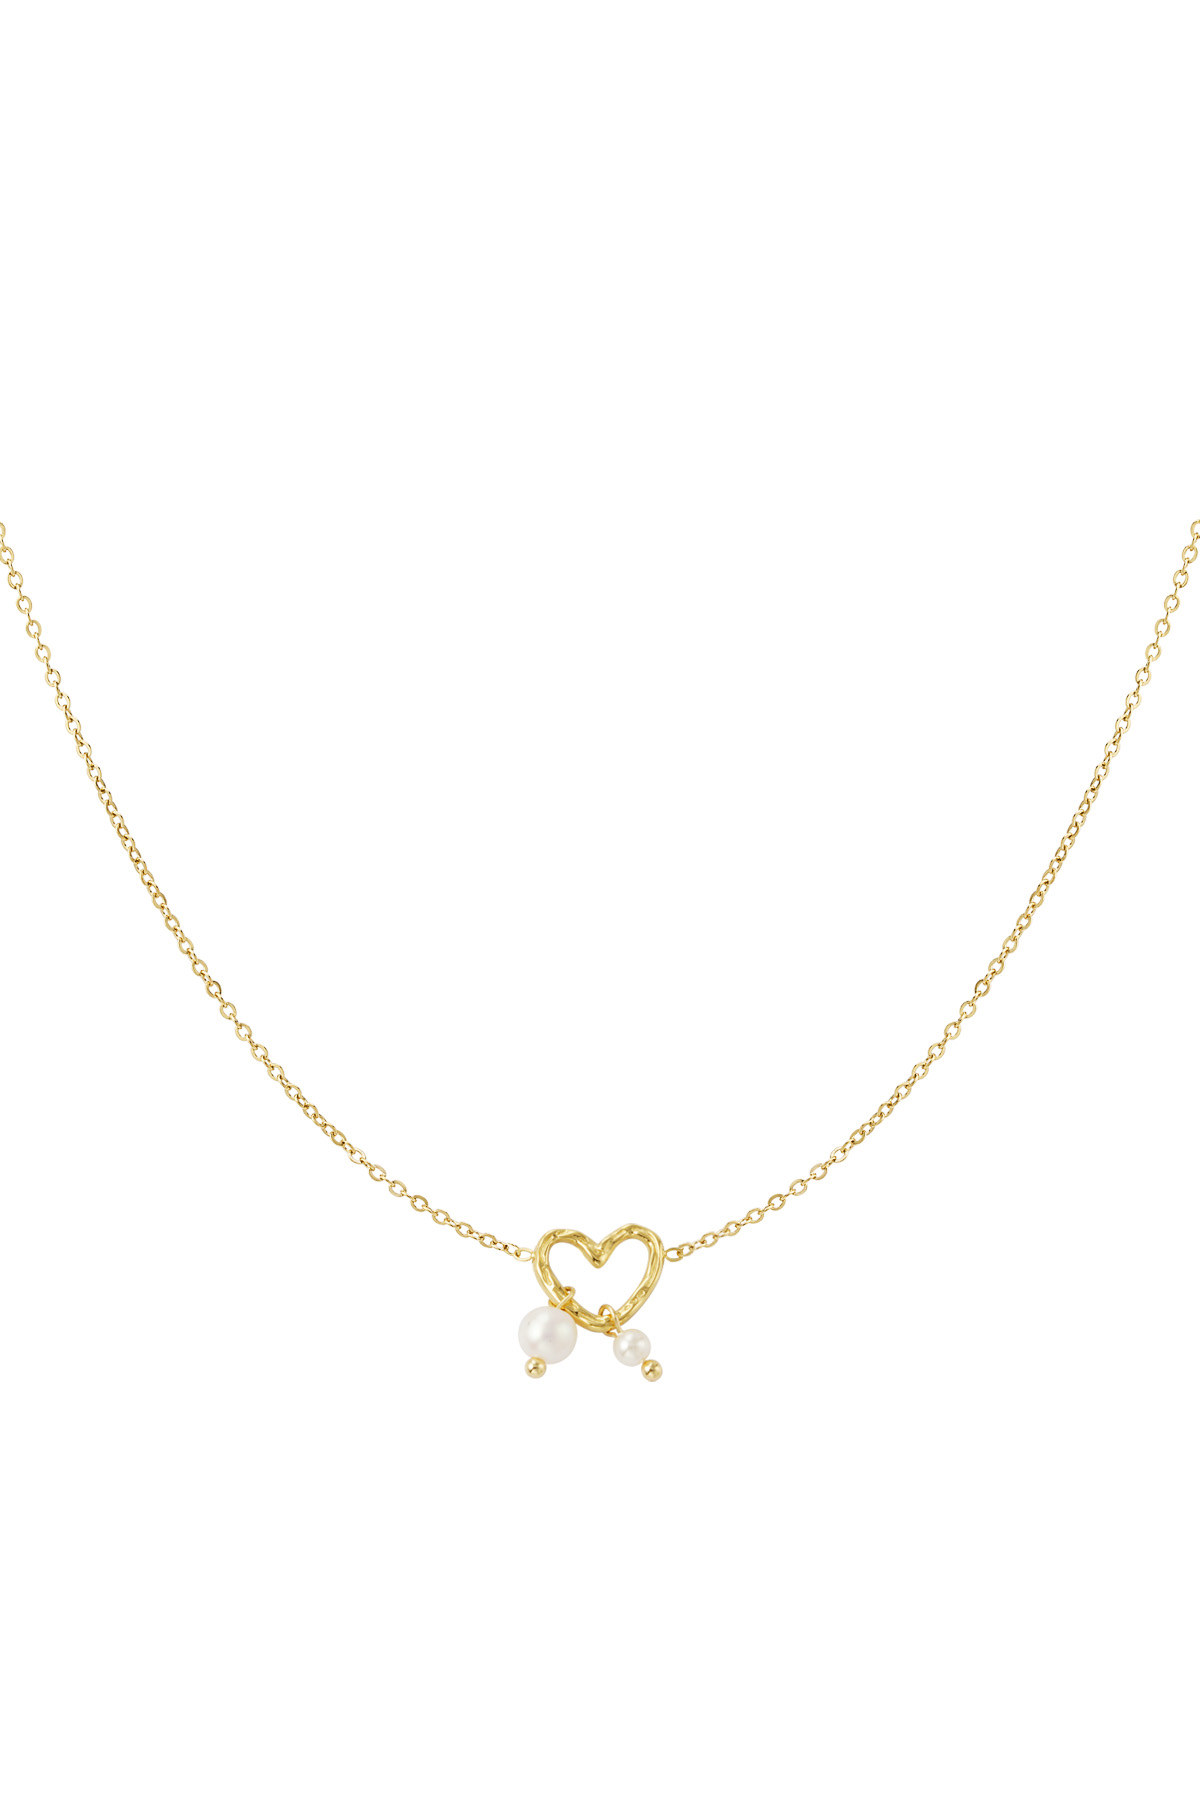 Necklace pearl love - gold h5 